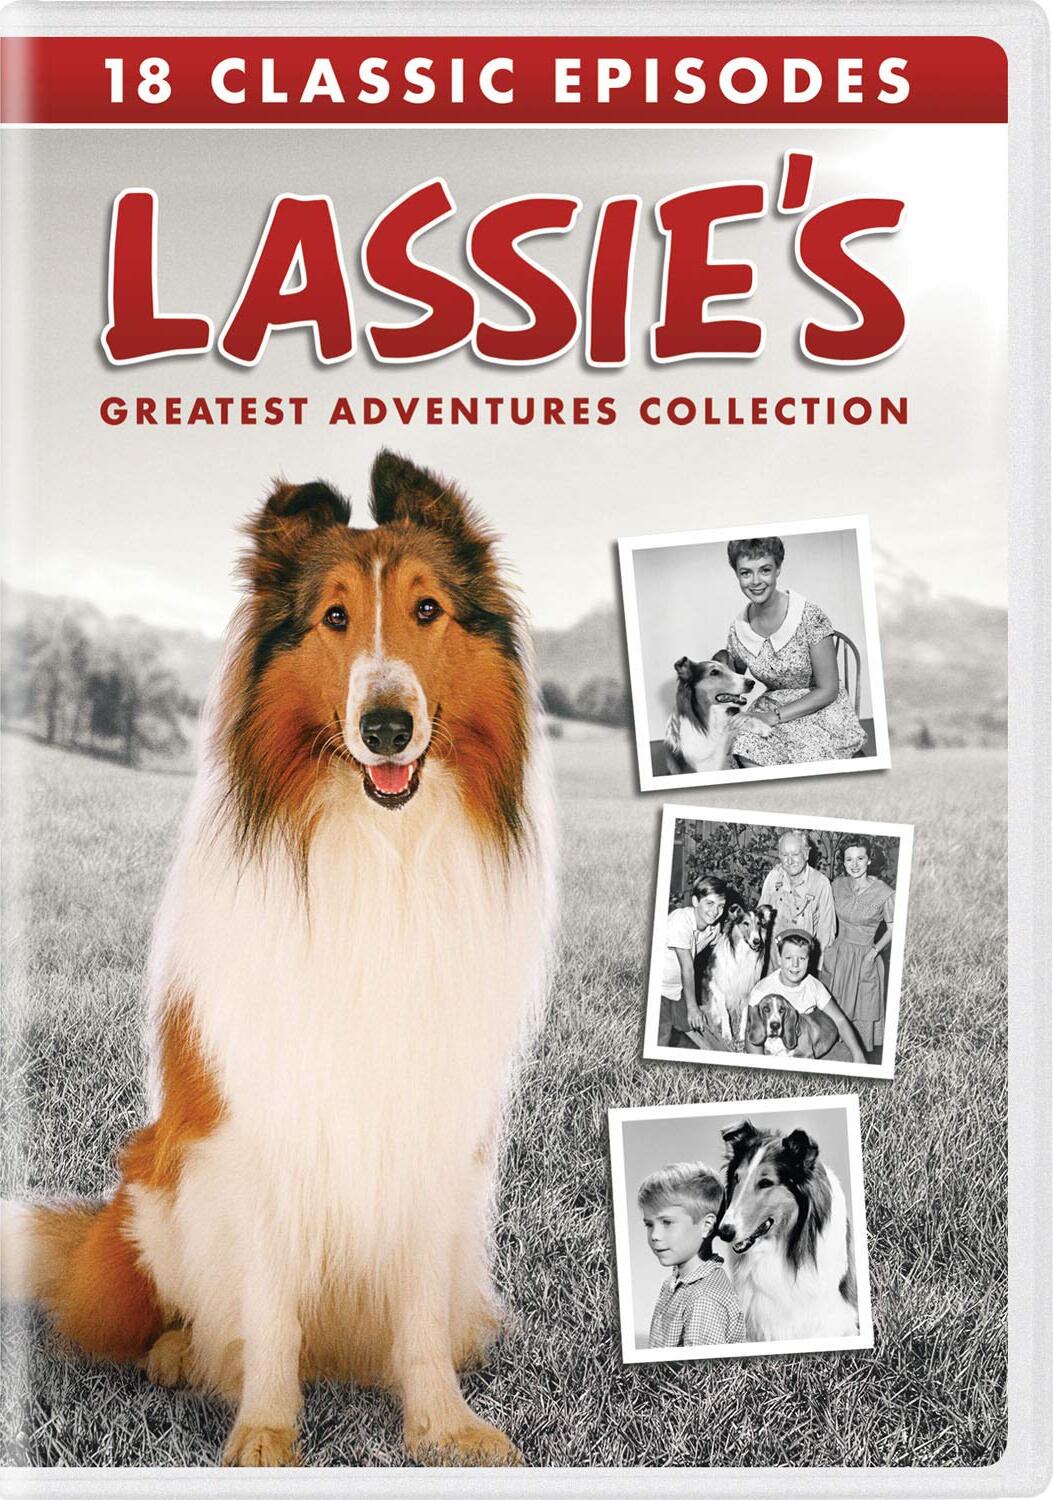 Lassie (1994) French dvd movie cover